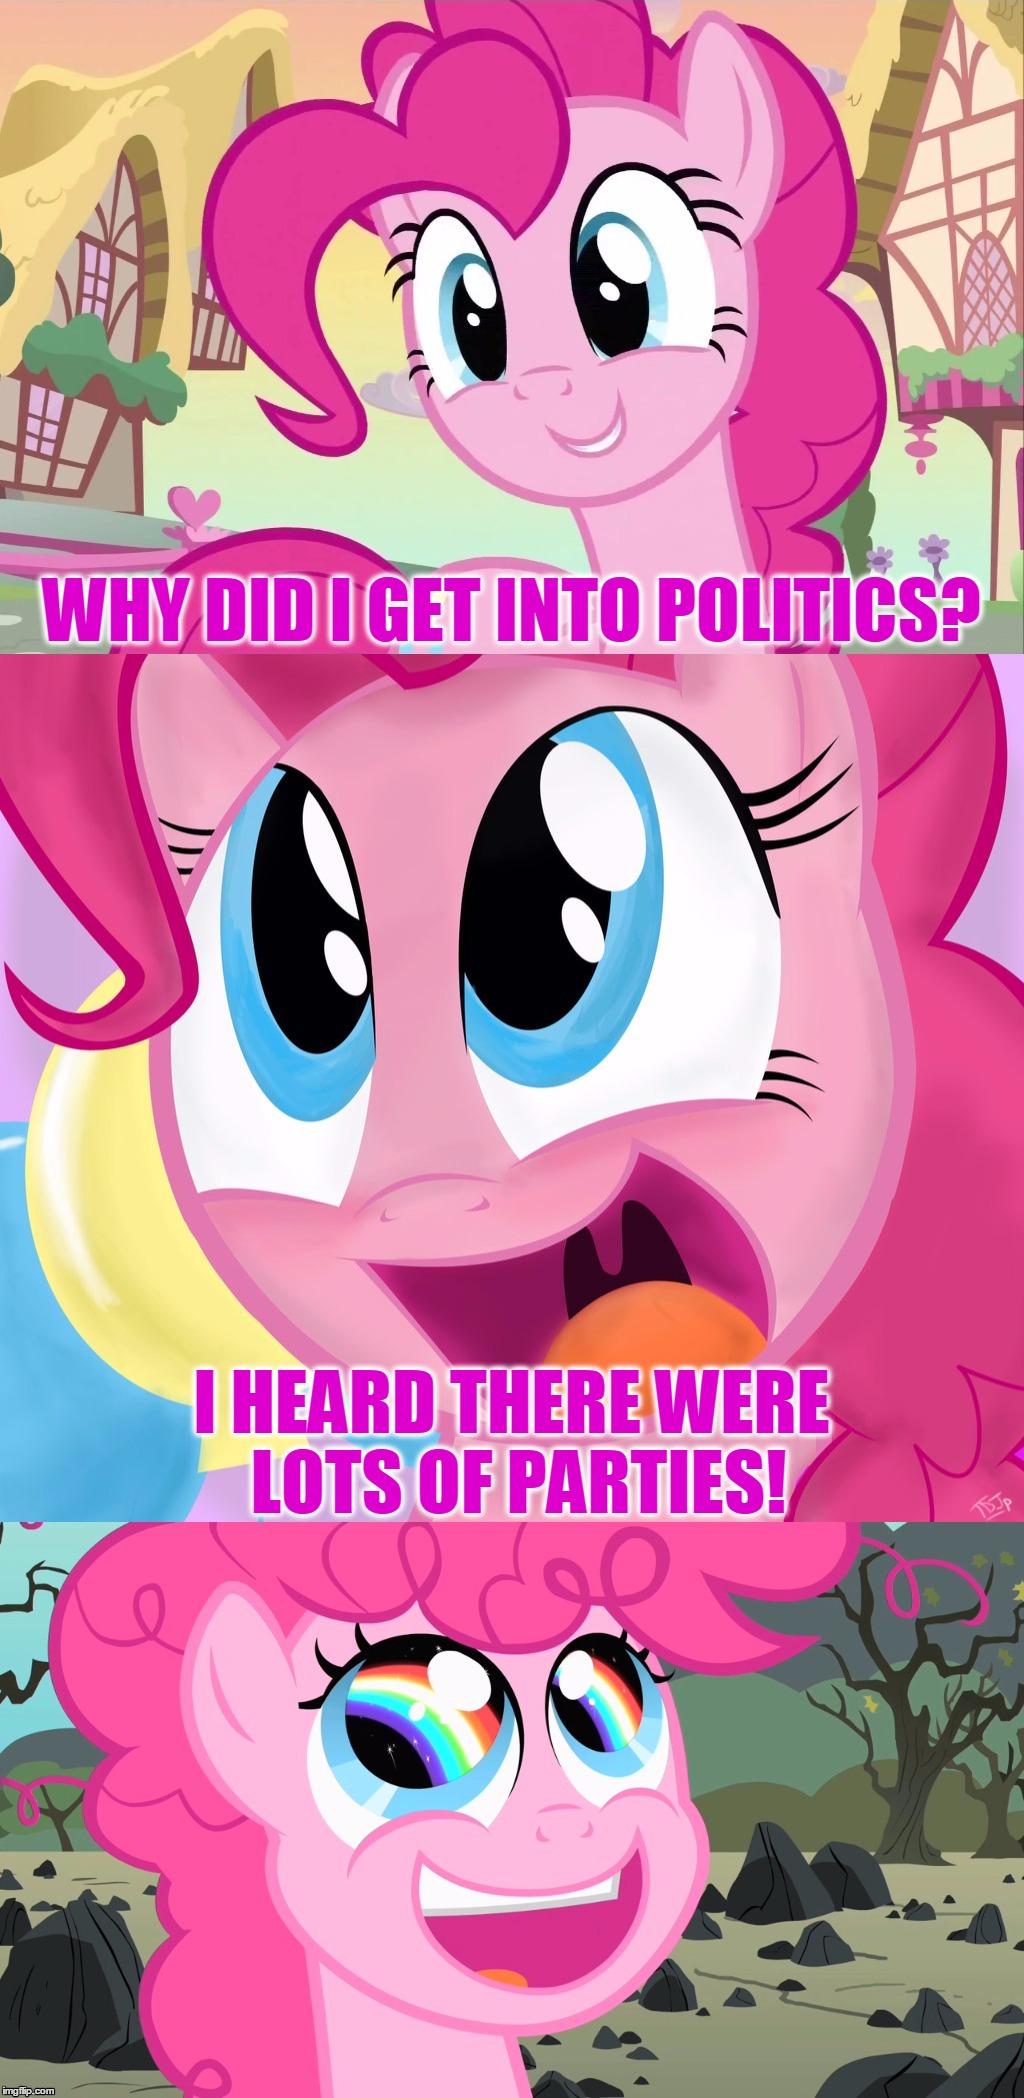 Bad Pun Pinkie Pie | WHY DID I GET INTO POLITICS? I HEARD THERE WERE LOTS OF PARTIES! | image tagged in bad pun pinkie pie,bad pun,memes,mlp,pinkie pie | made w/ Imgflip meme maker